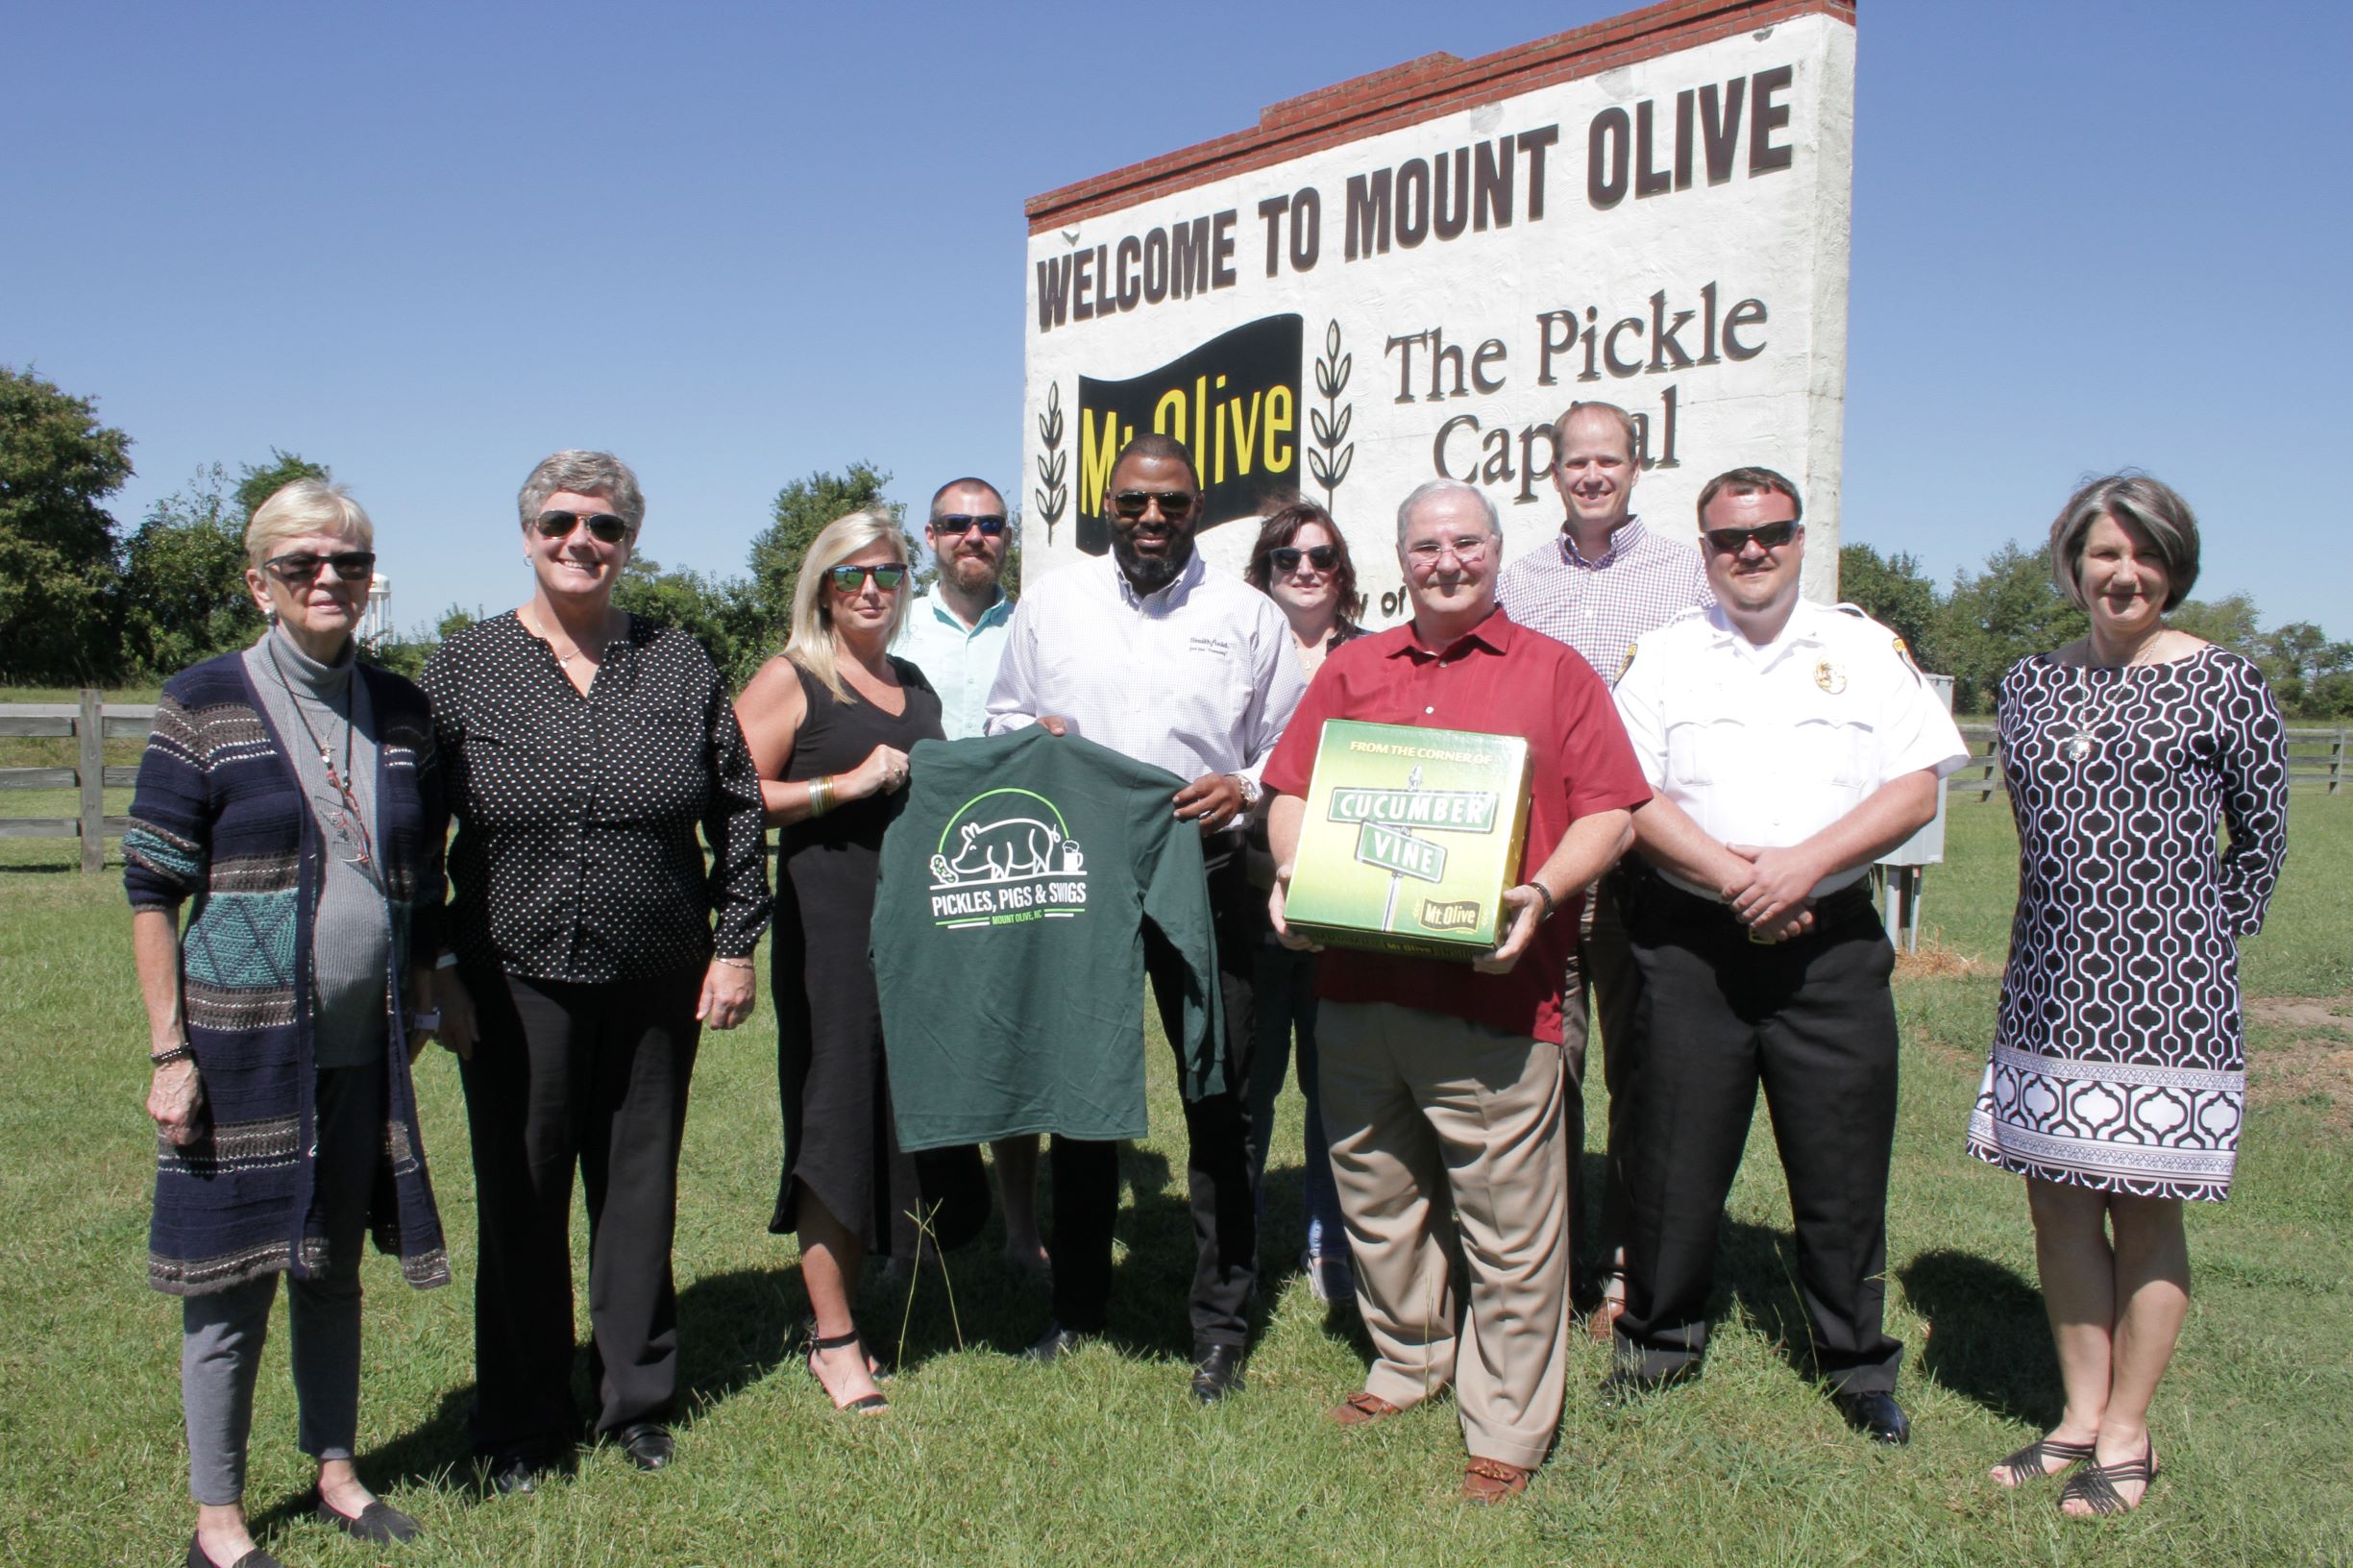 Smithfield Foods Makes Donation For Pickles, Pigs & Swigs